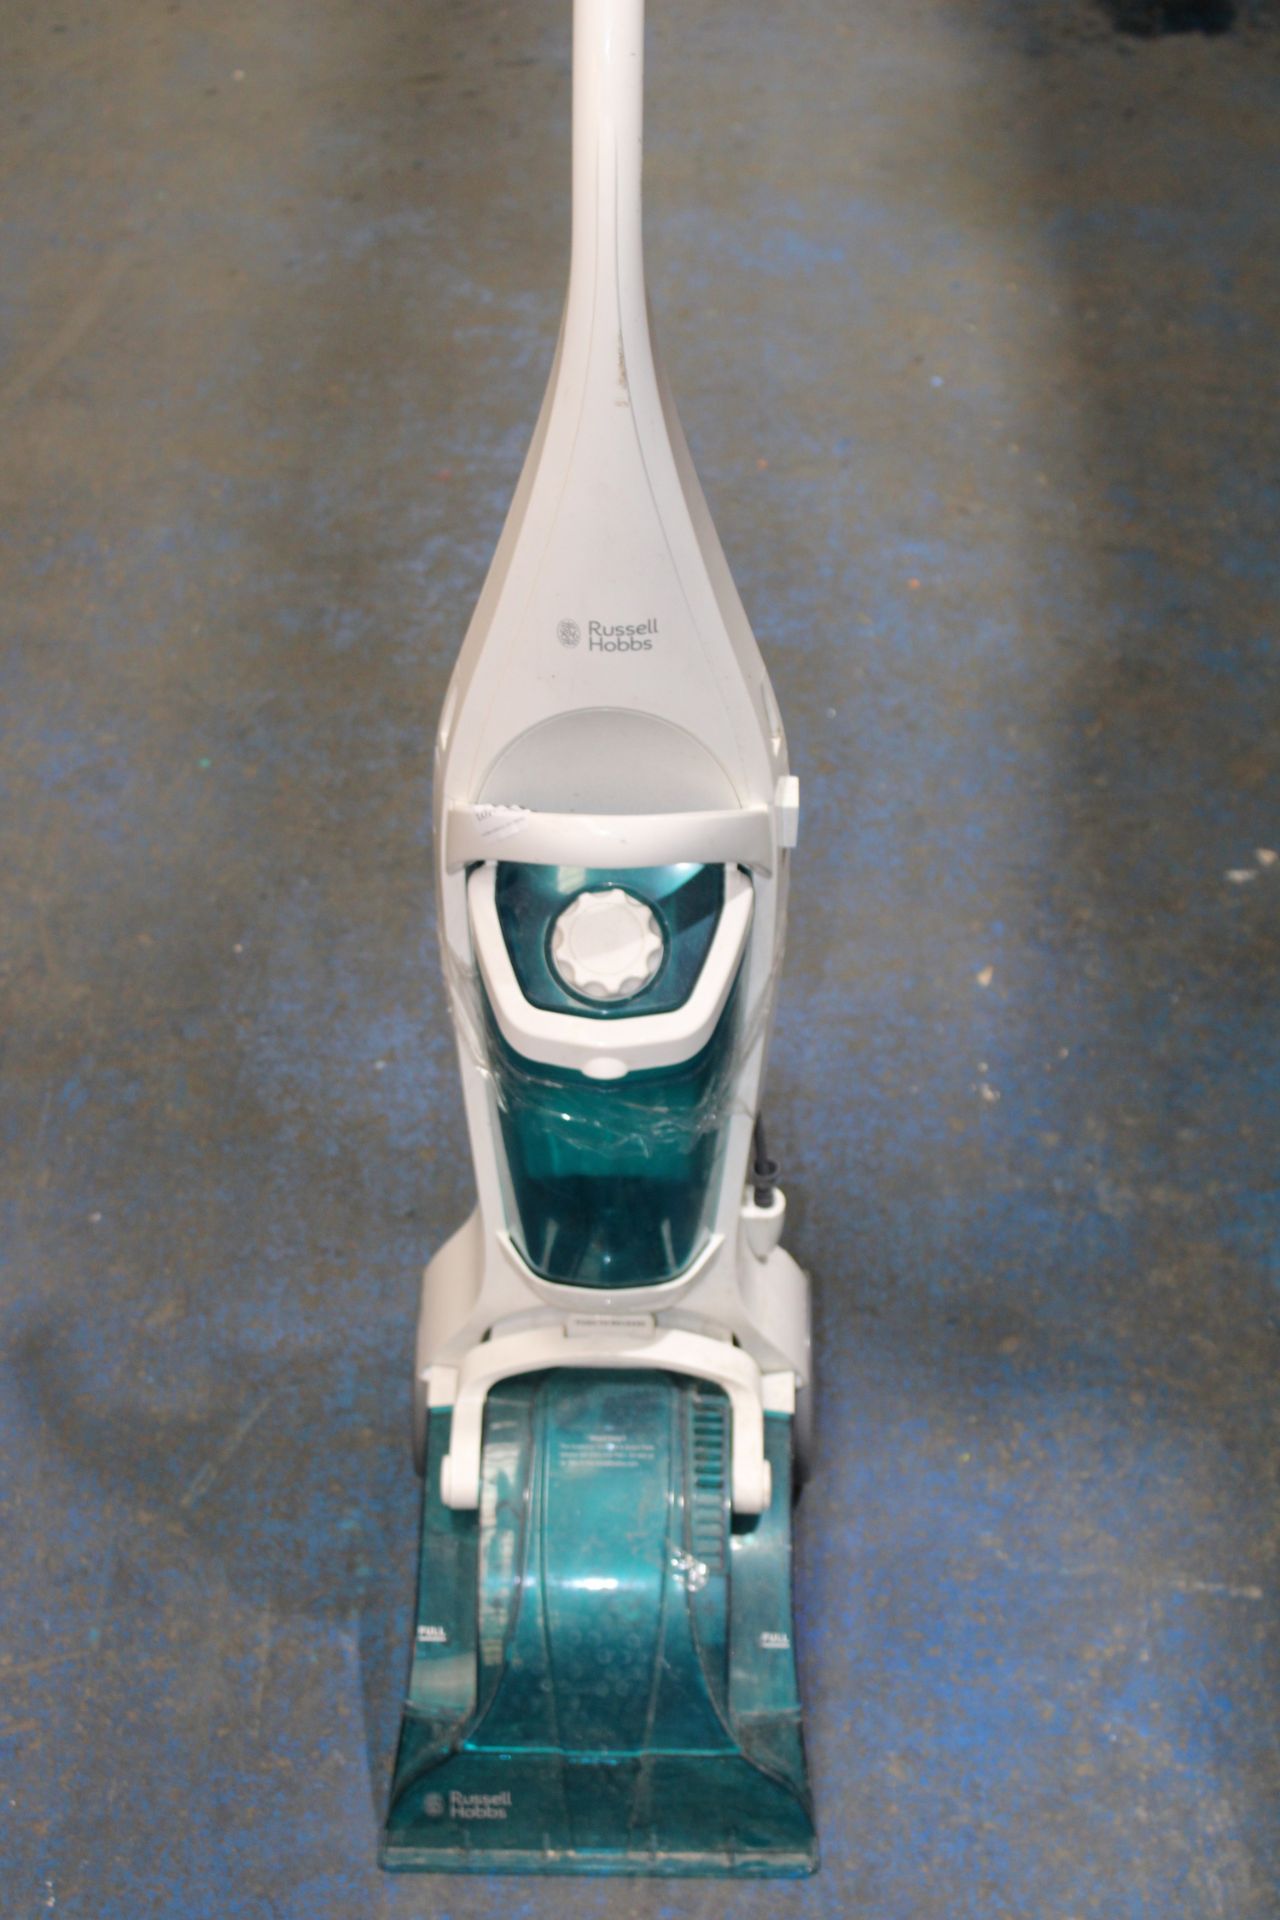 UNBOXED RUSSELL HOBBS UPRIGHT CARPET WASHER Condition ReportAppraisal Available on Request- All